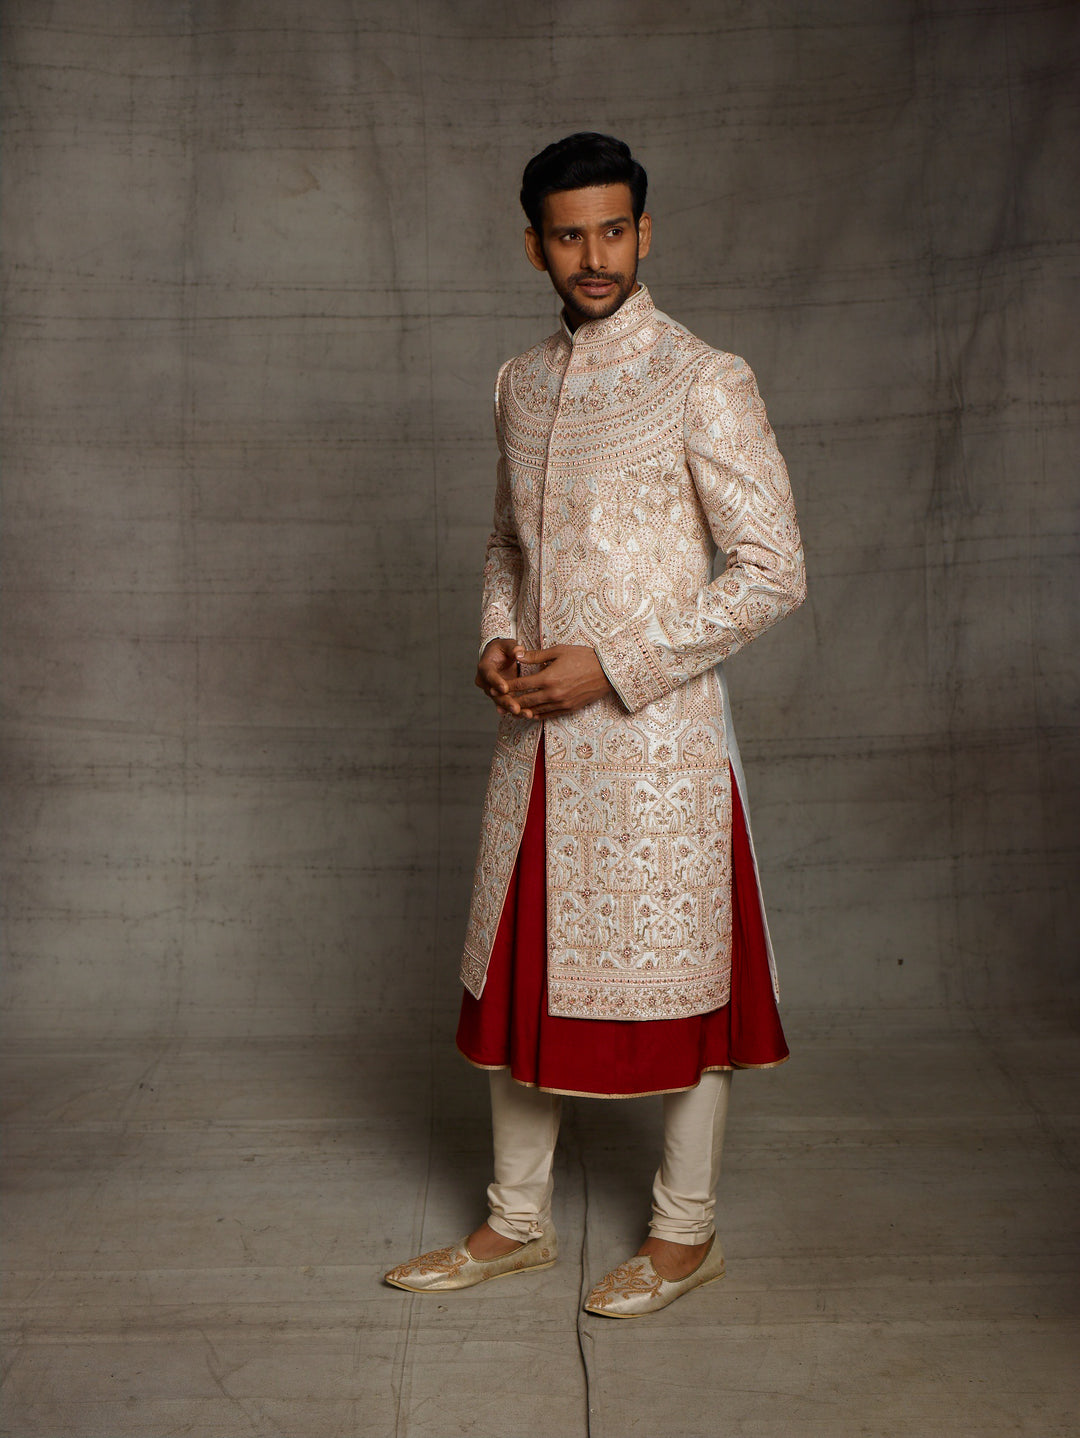 Off-white sherwani with rose gold thread embroidery